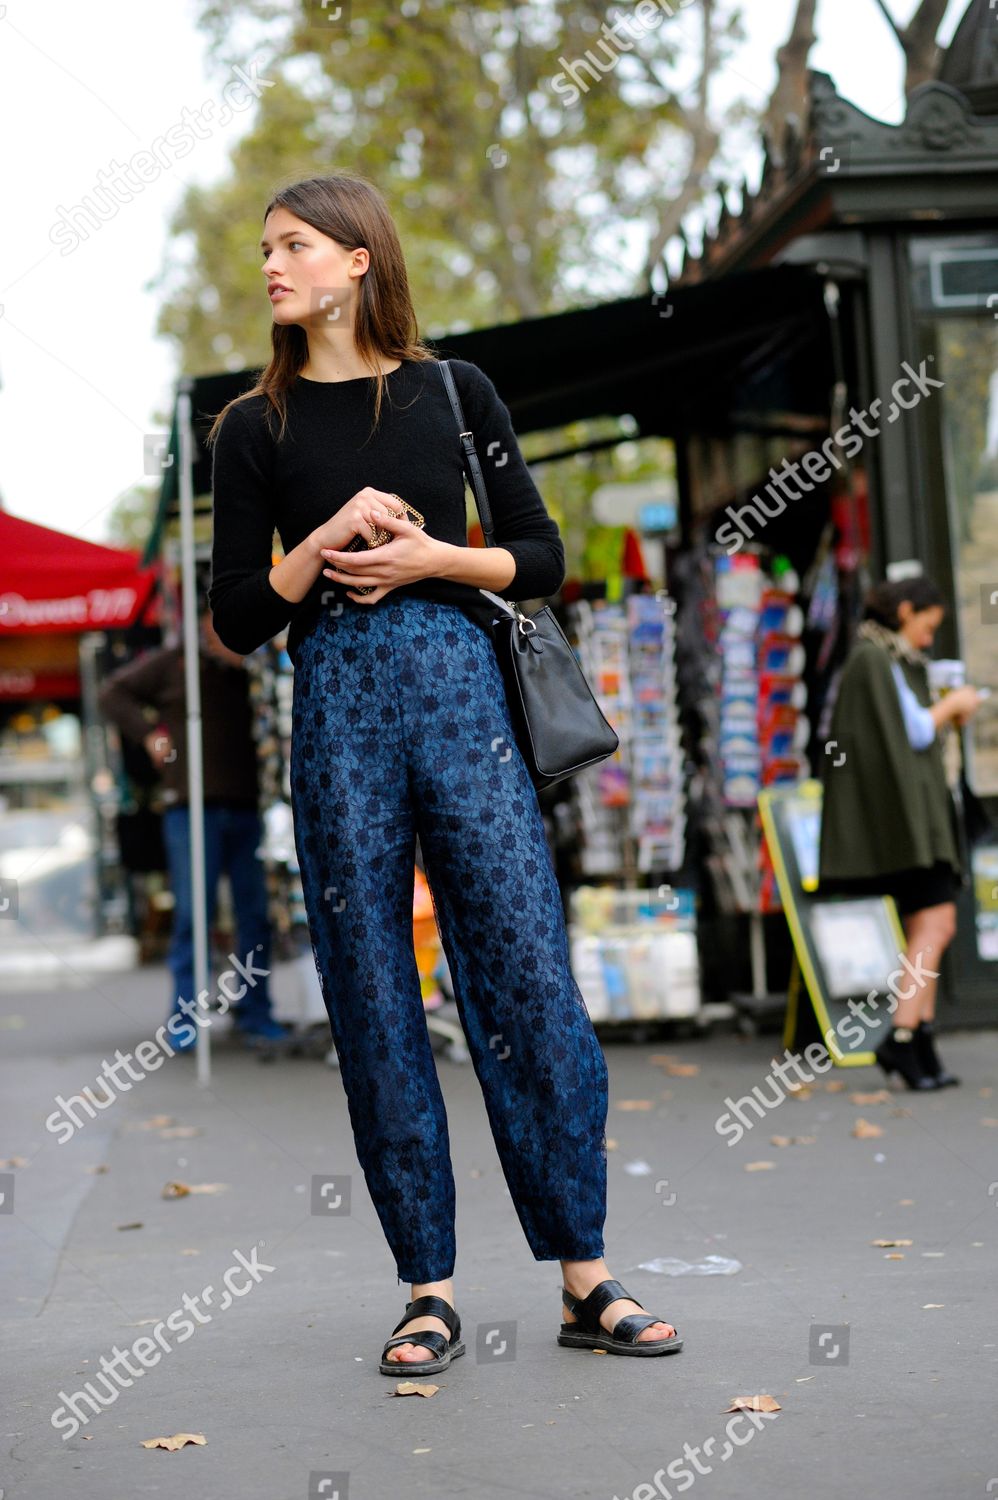 Julia Van Os Model Off Duty After Editorial Stock Photo Stock Image Shutterstock